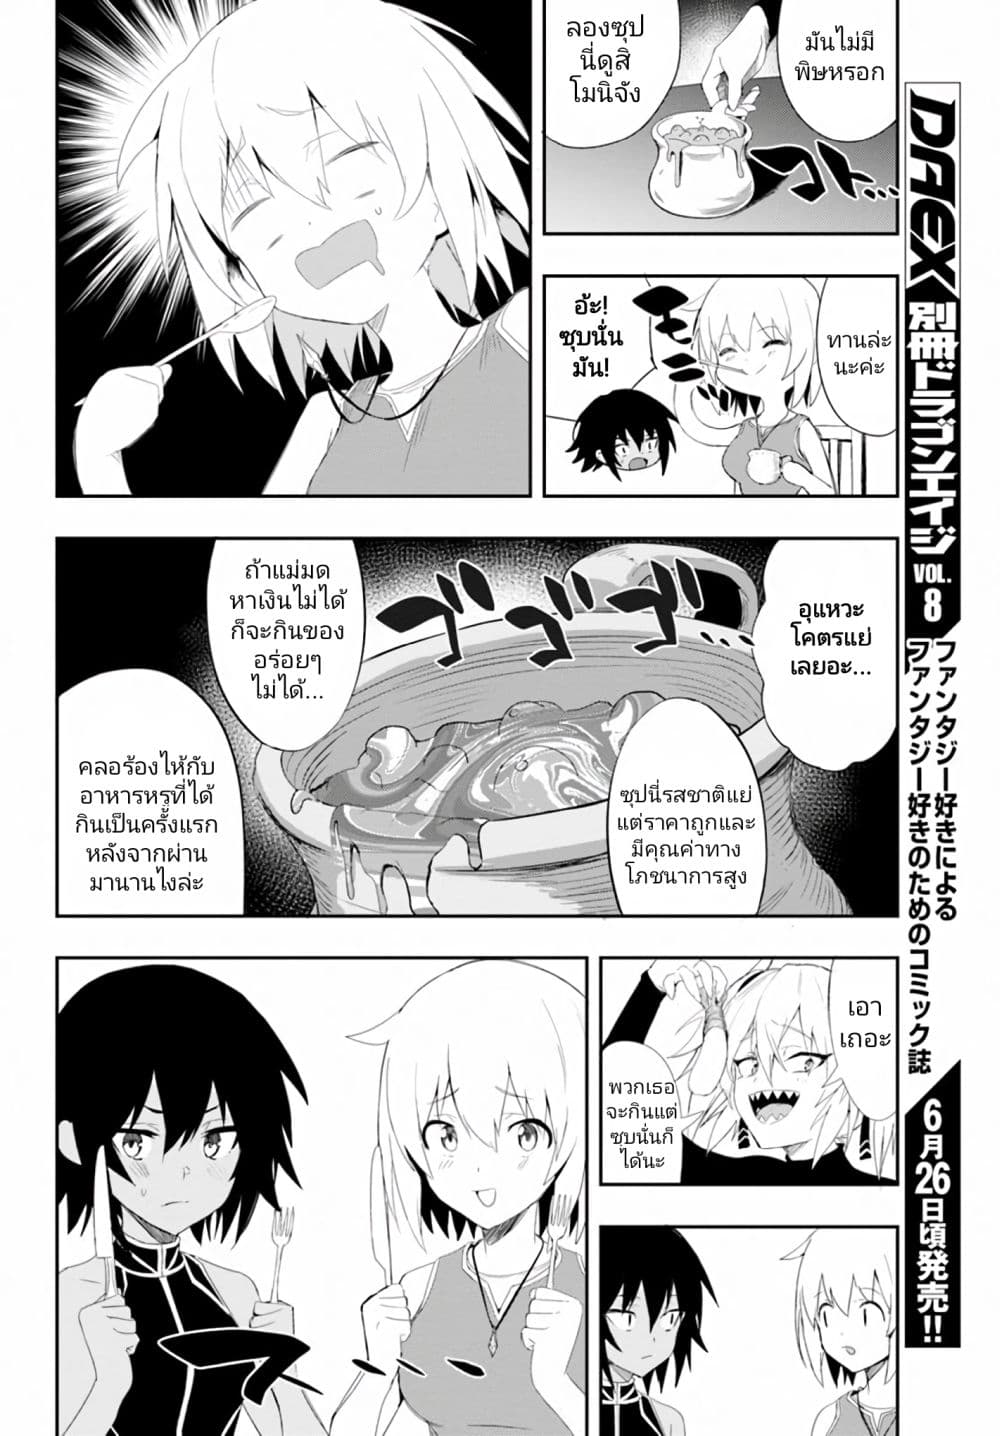 Witch Guild Fantasia 6 (4)